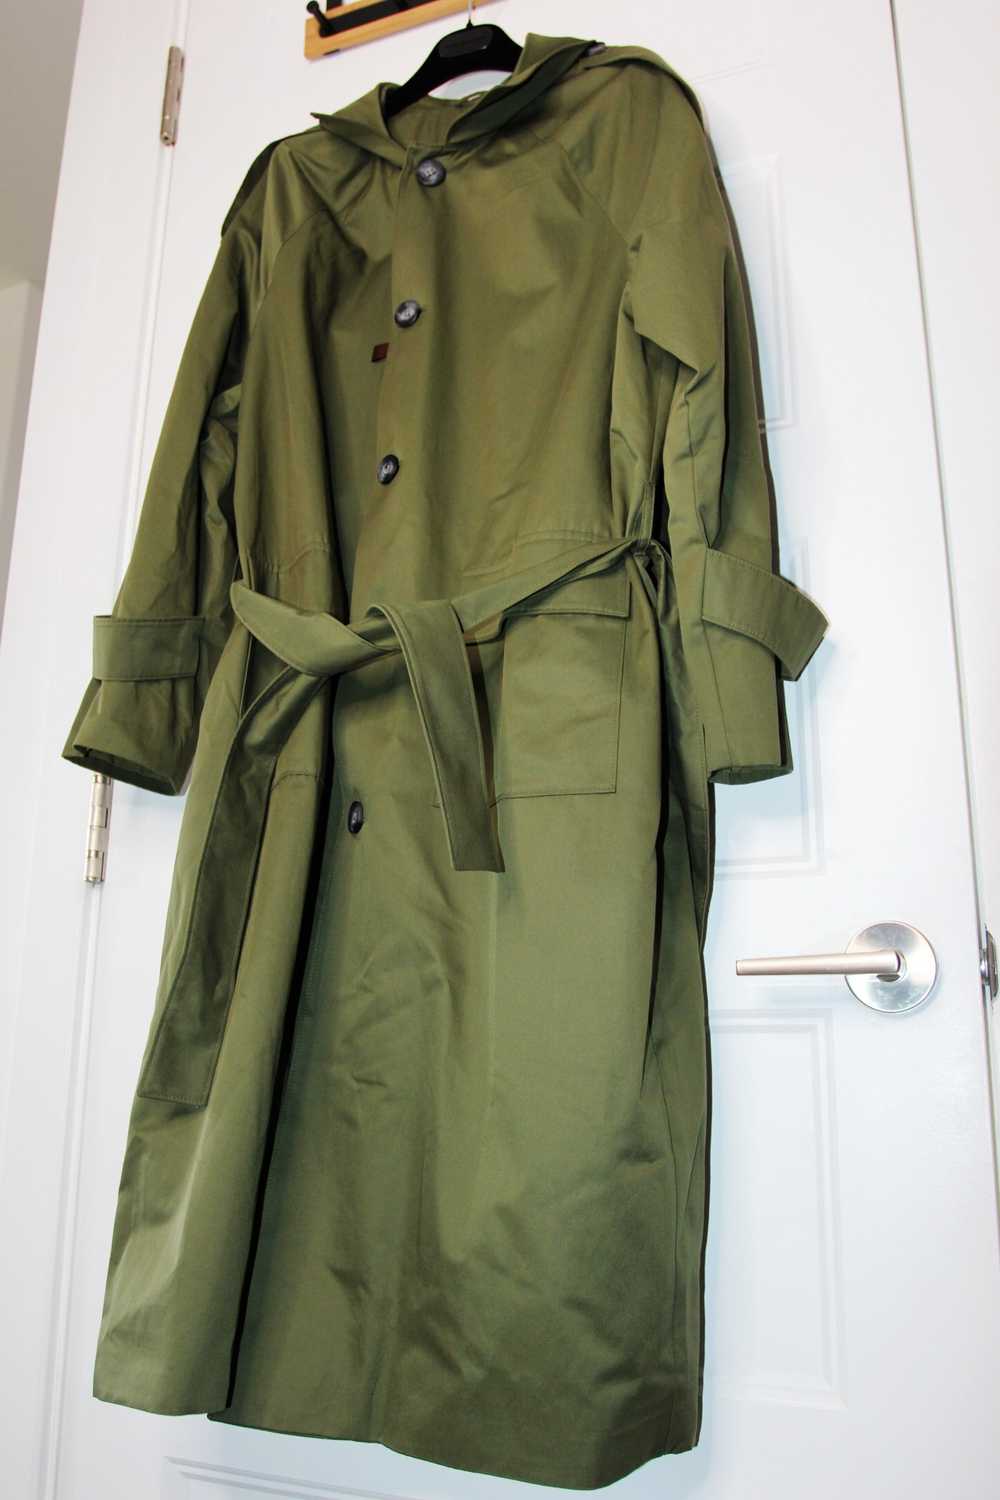 BNWT SS23 BY THE OAK BELTED LONG TRENCH COAT XL - image 6